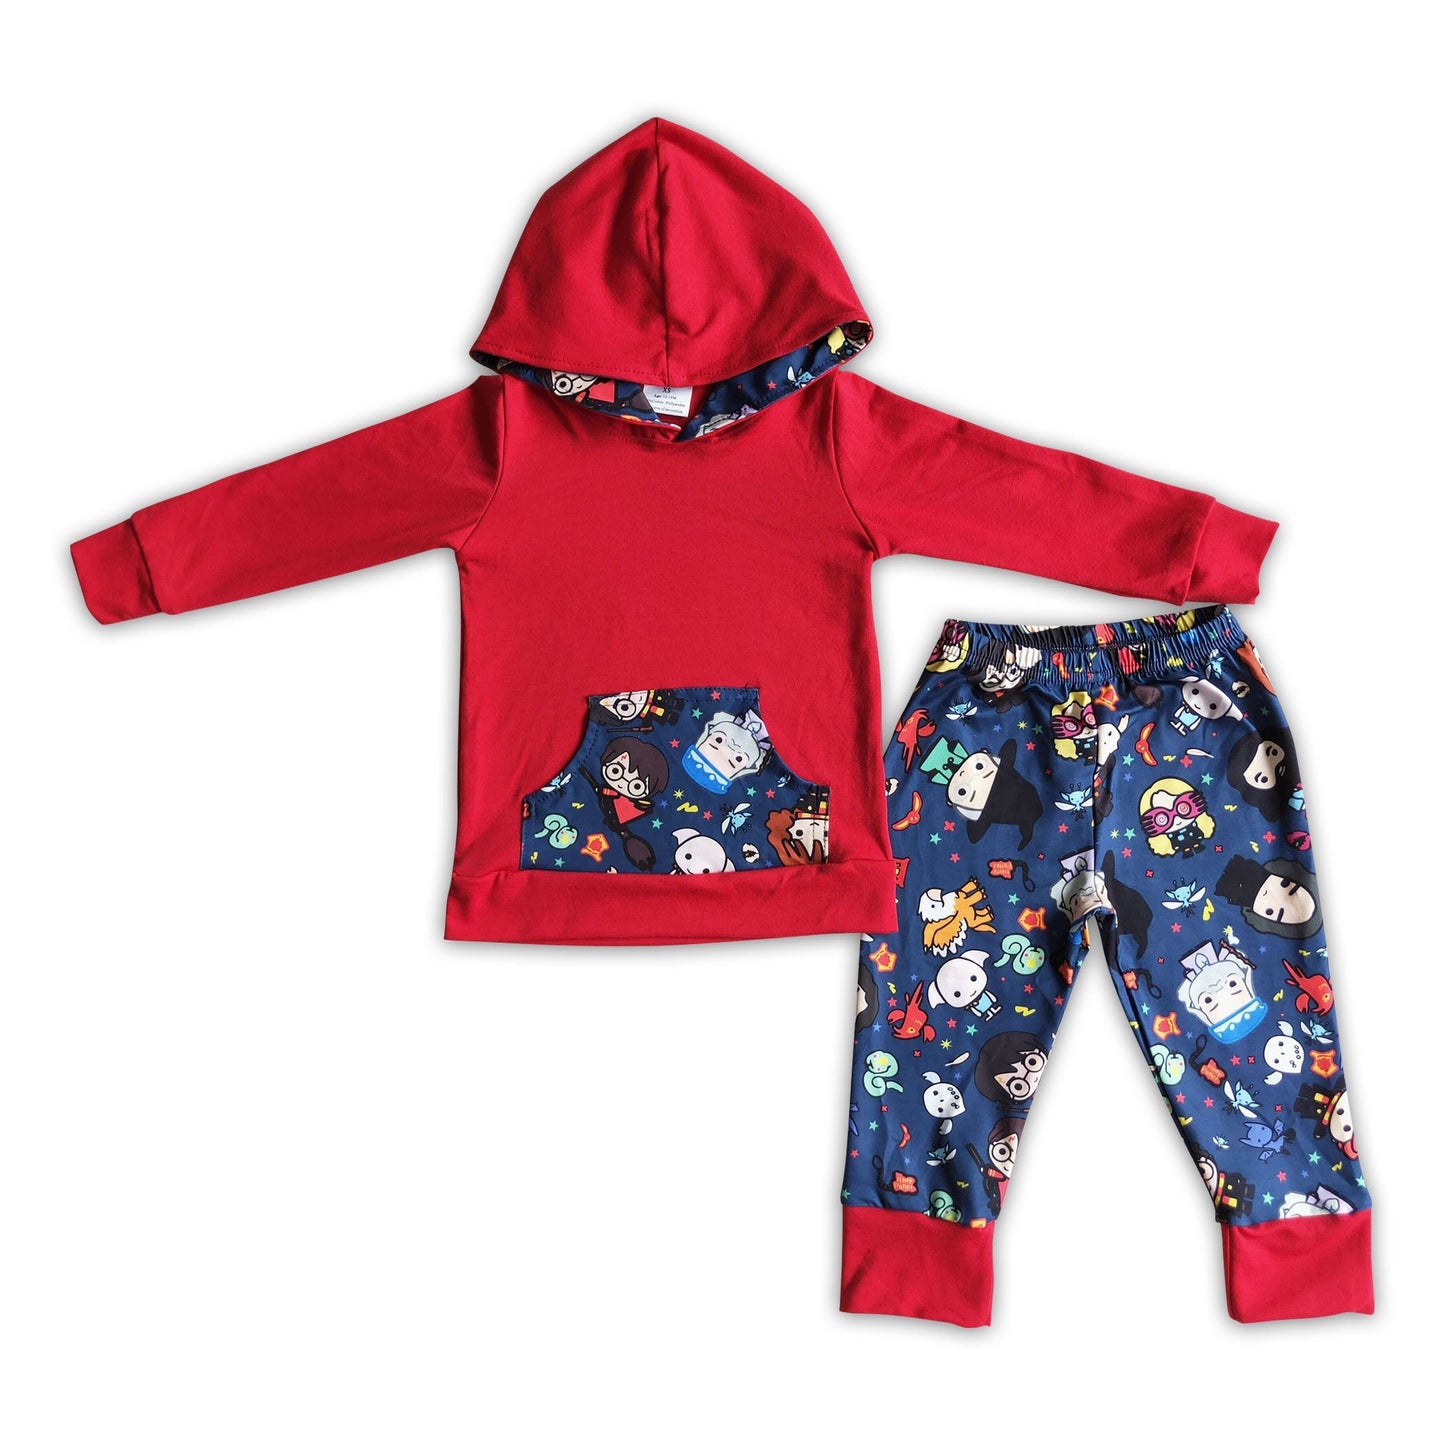 Red hoodie magic pants boy fall winter outfits